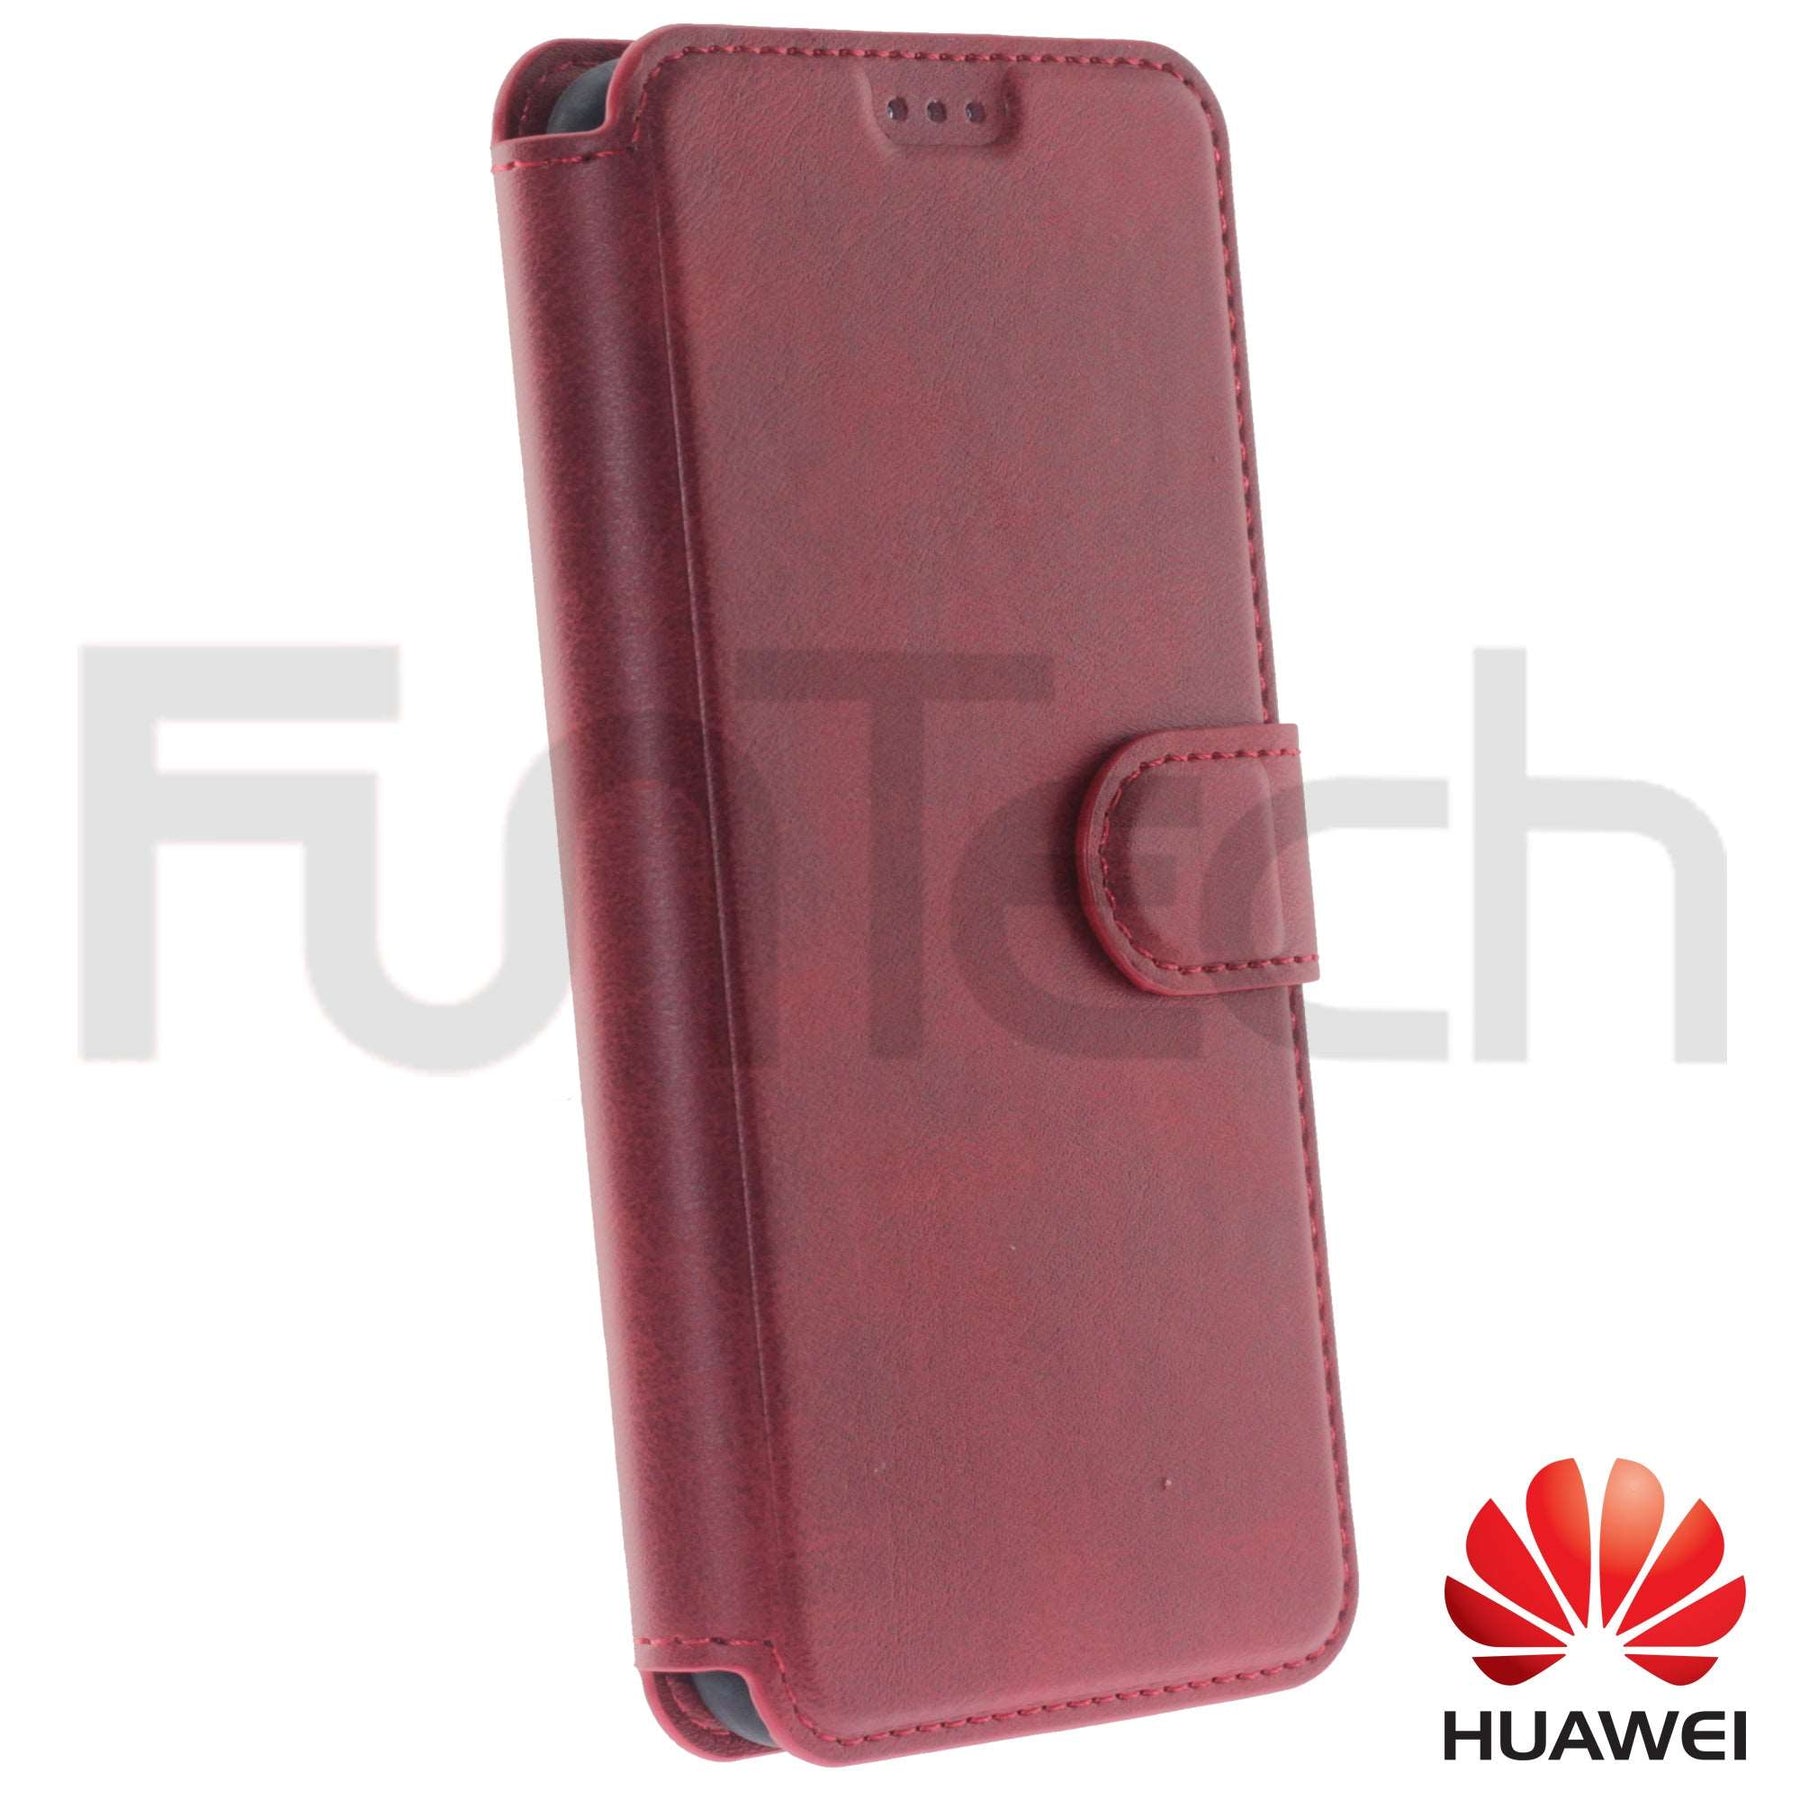 Huawei, P Smart 2020, Leather Wallet Case, Color Red.